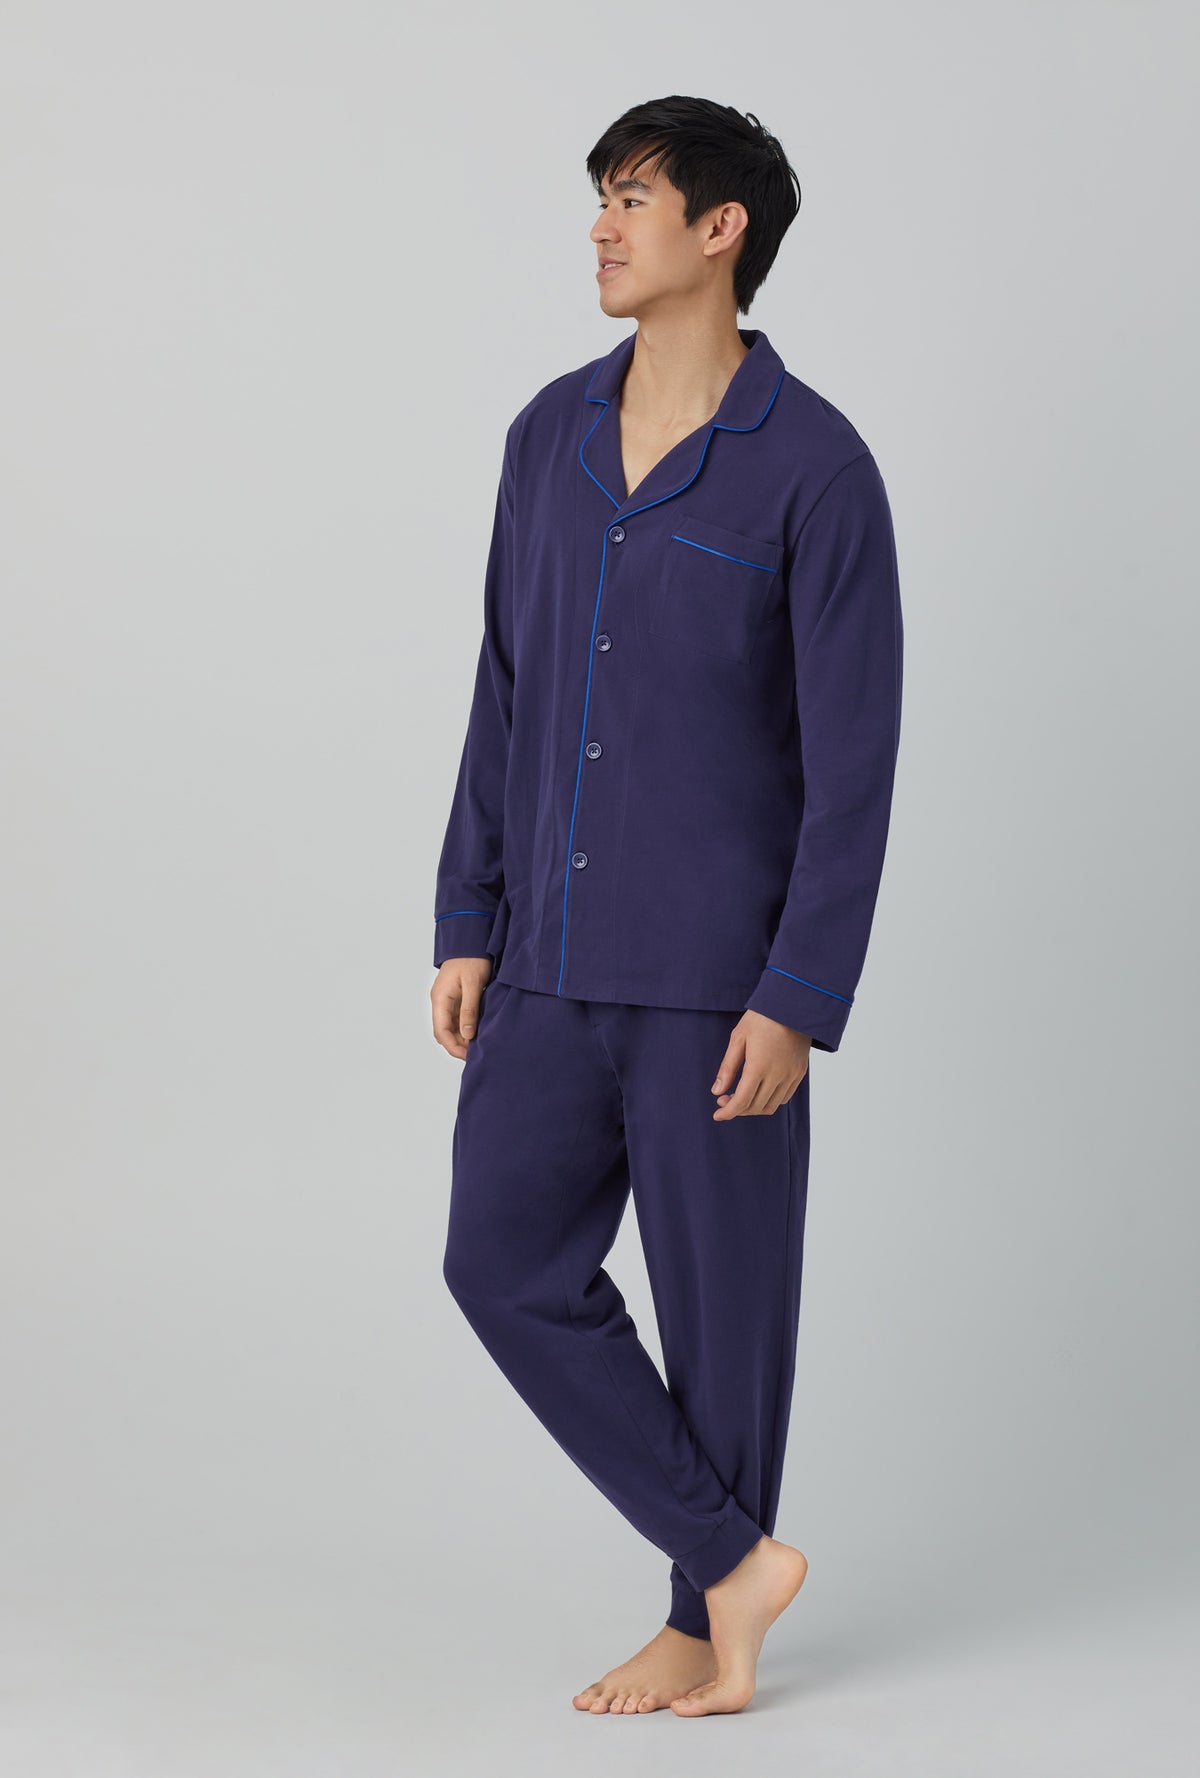 A man wearing navy long sleeve and jogger stretch jersey pj set.